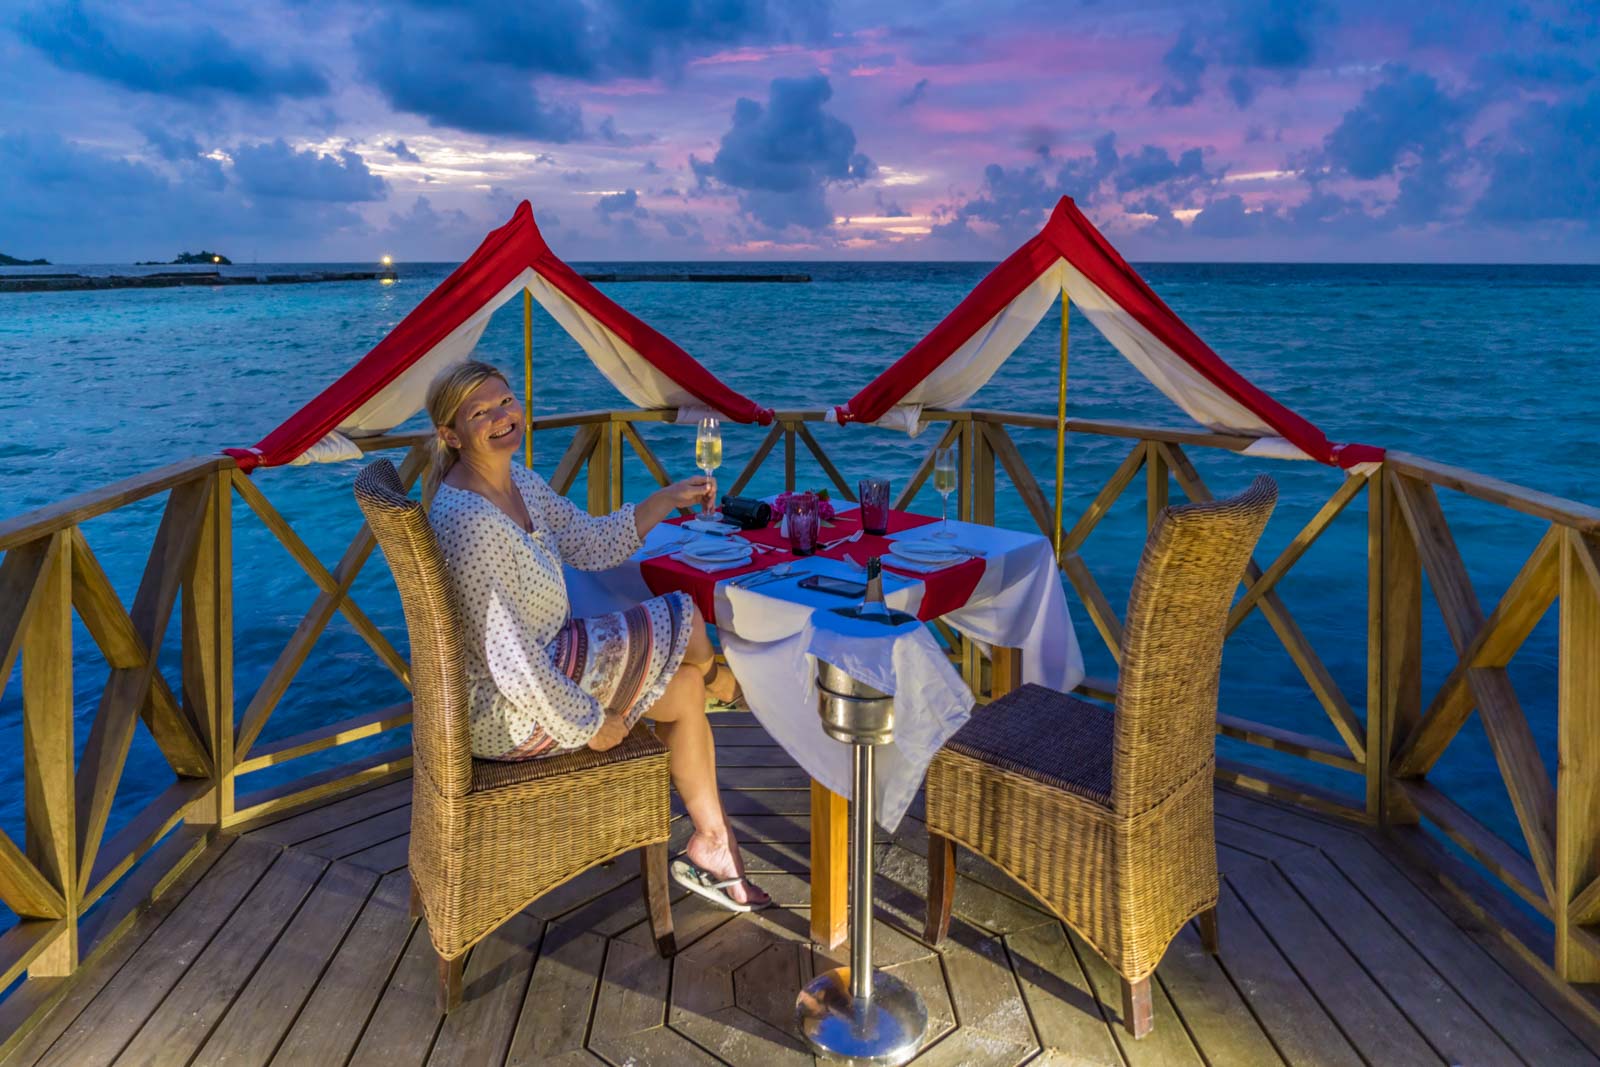 Dinner in the Maldives Cost